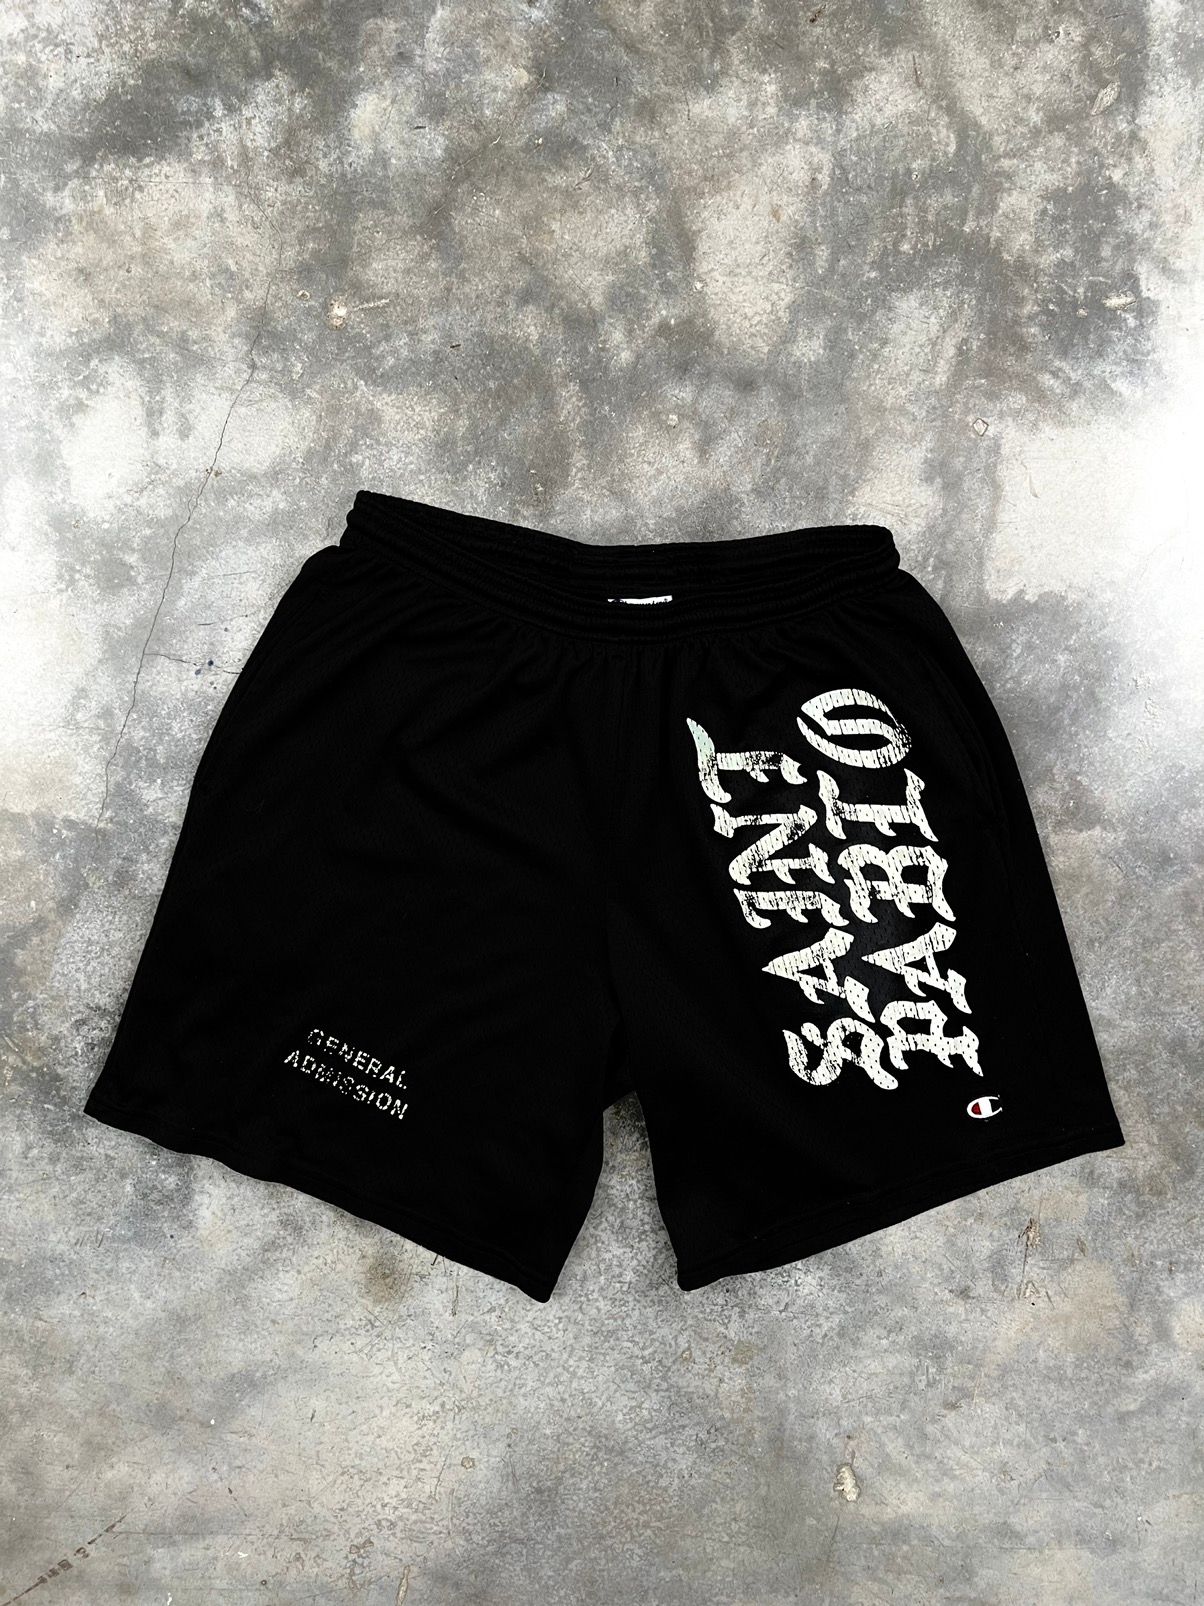 Pre-owned Kanye West Saint Pablo Wolves Basketball Shorts Black Small